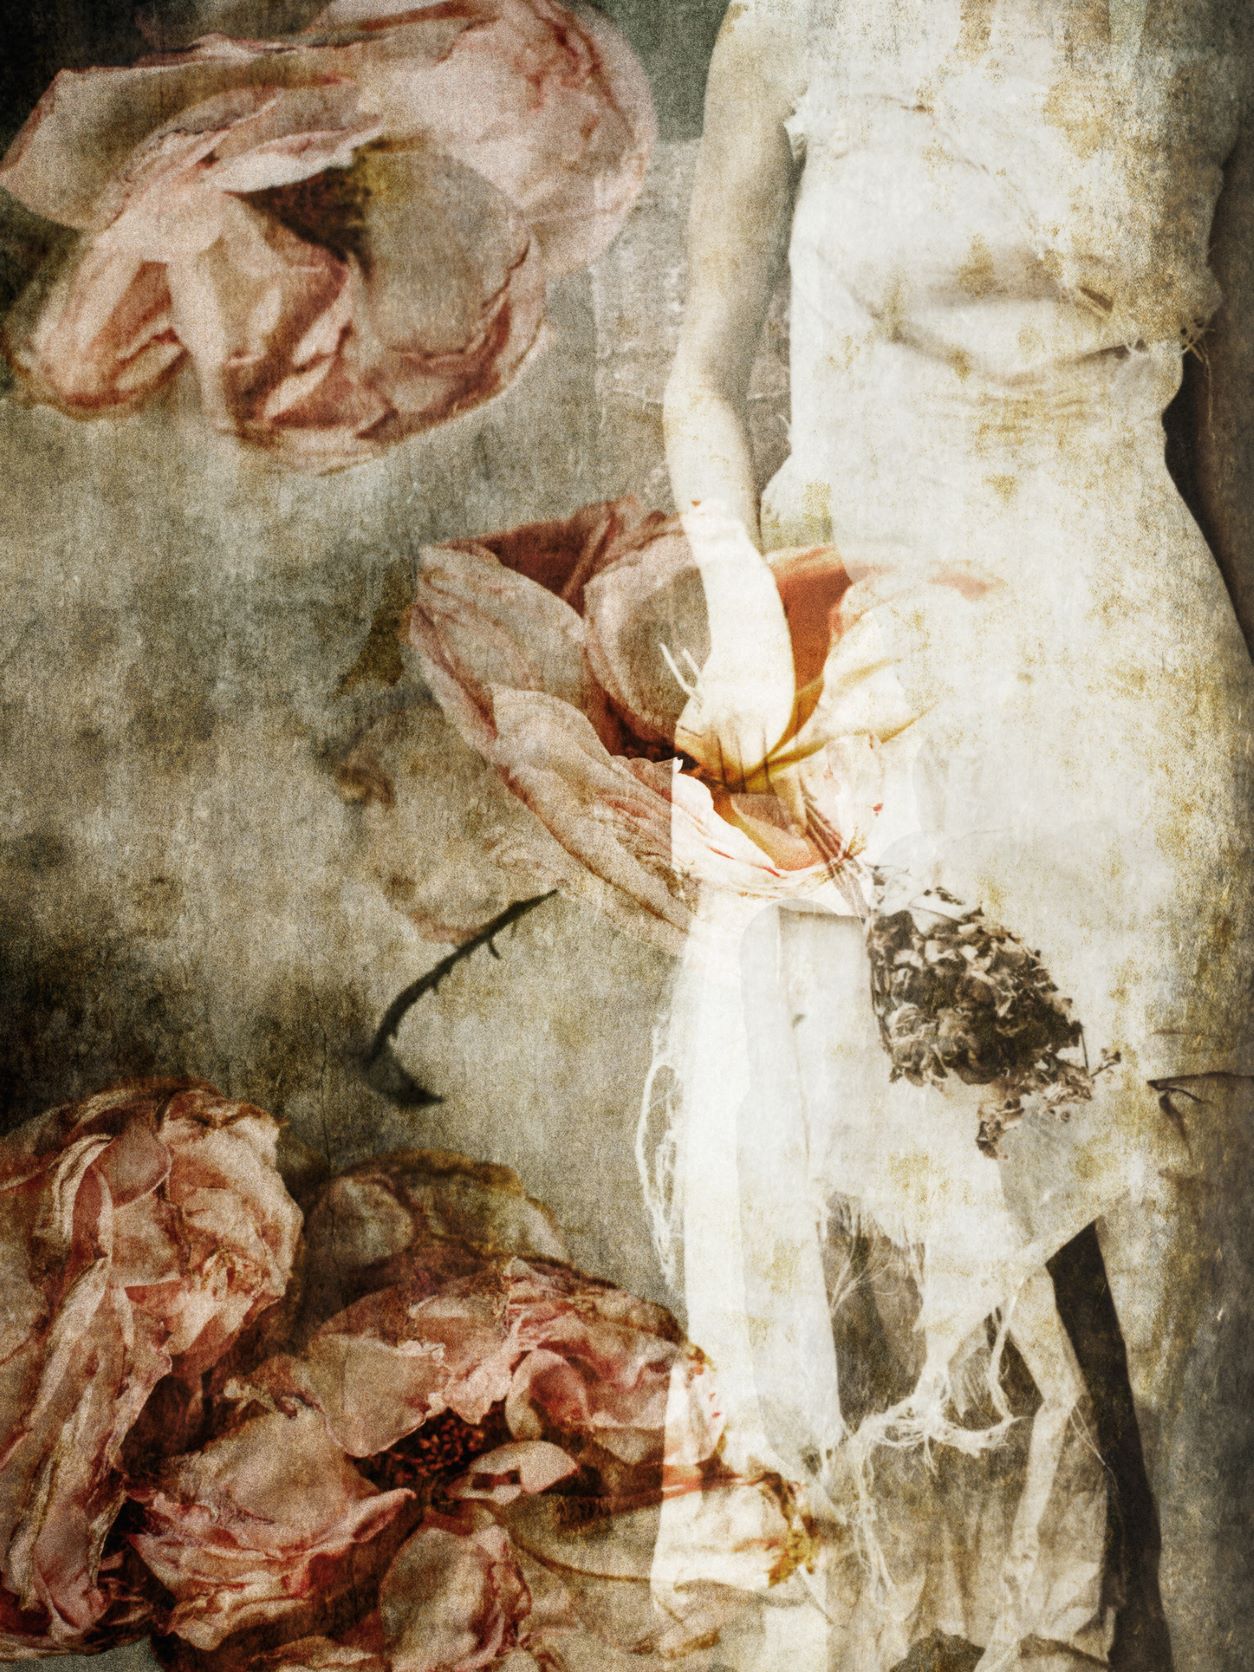 Photograph of a woman with images of flowers superimposed on top of it